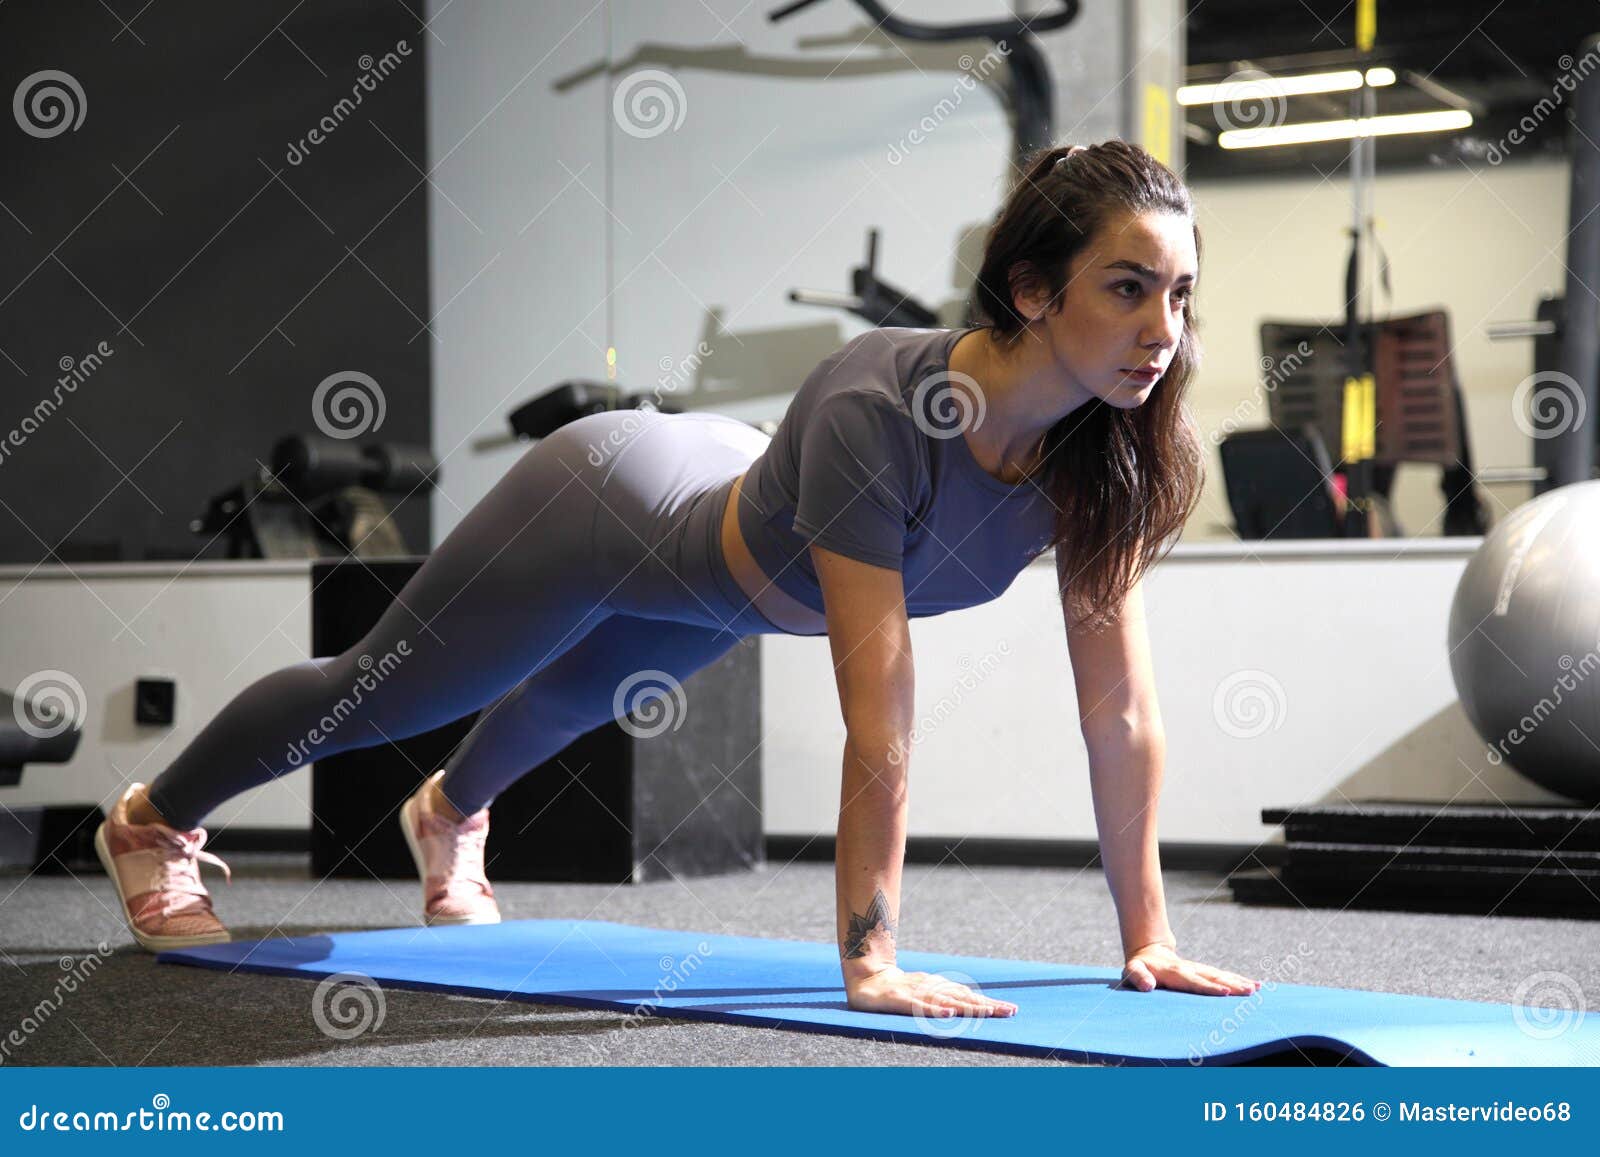 Young Girl Doing Fitness Exercises in the Gym. Training in the Gym